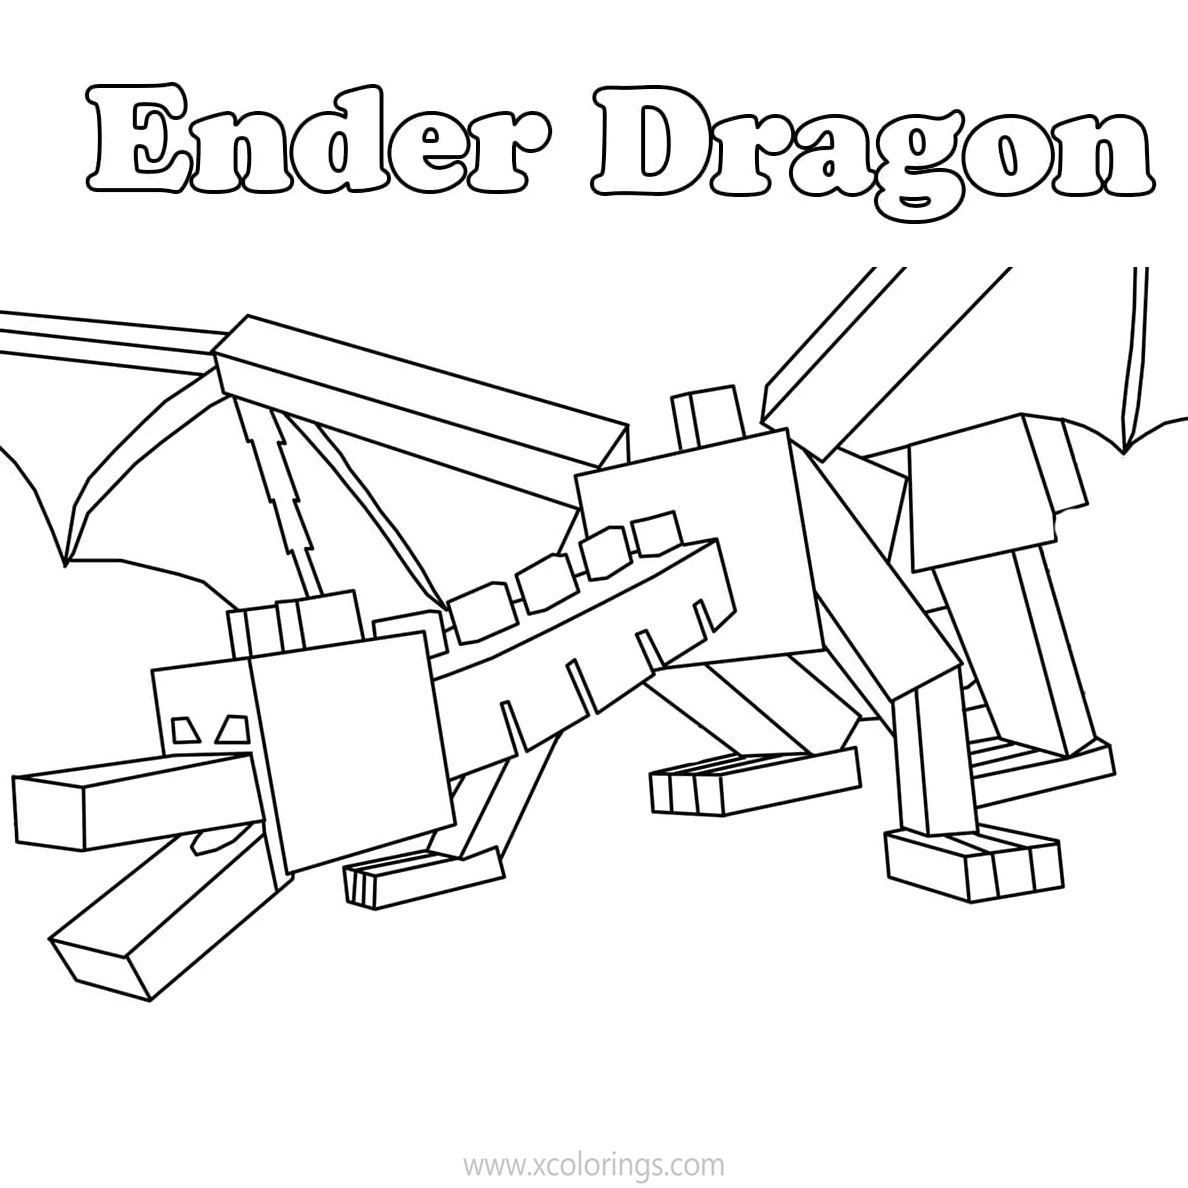 Free Ender Dragon Coloring Pages Line Drawing printable